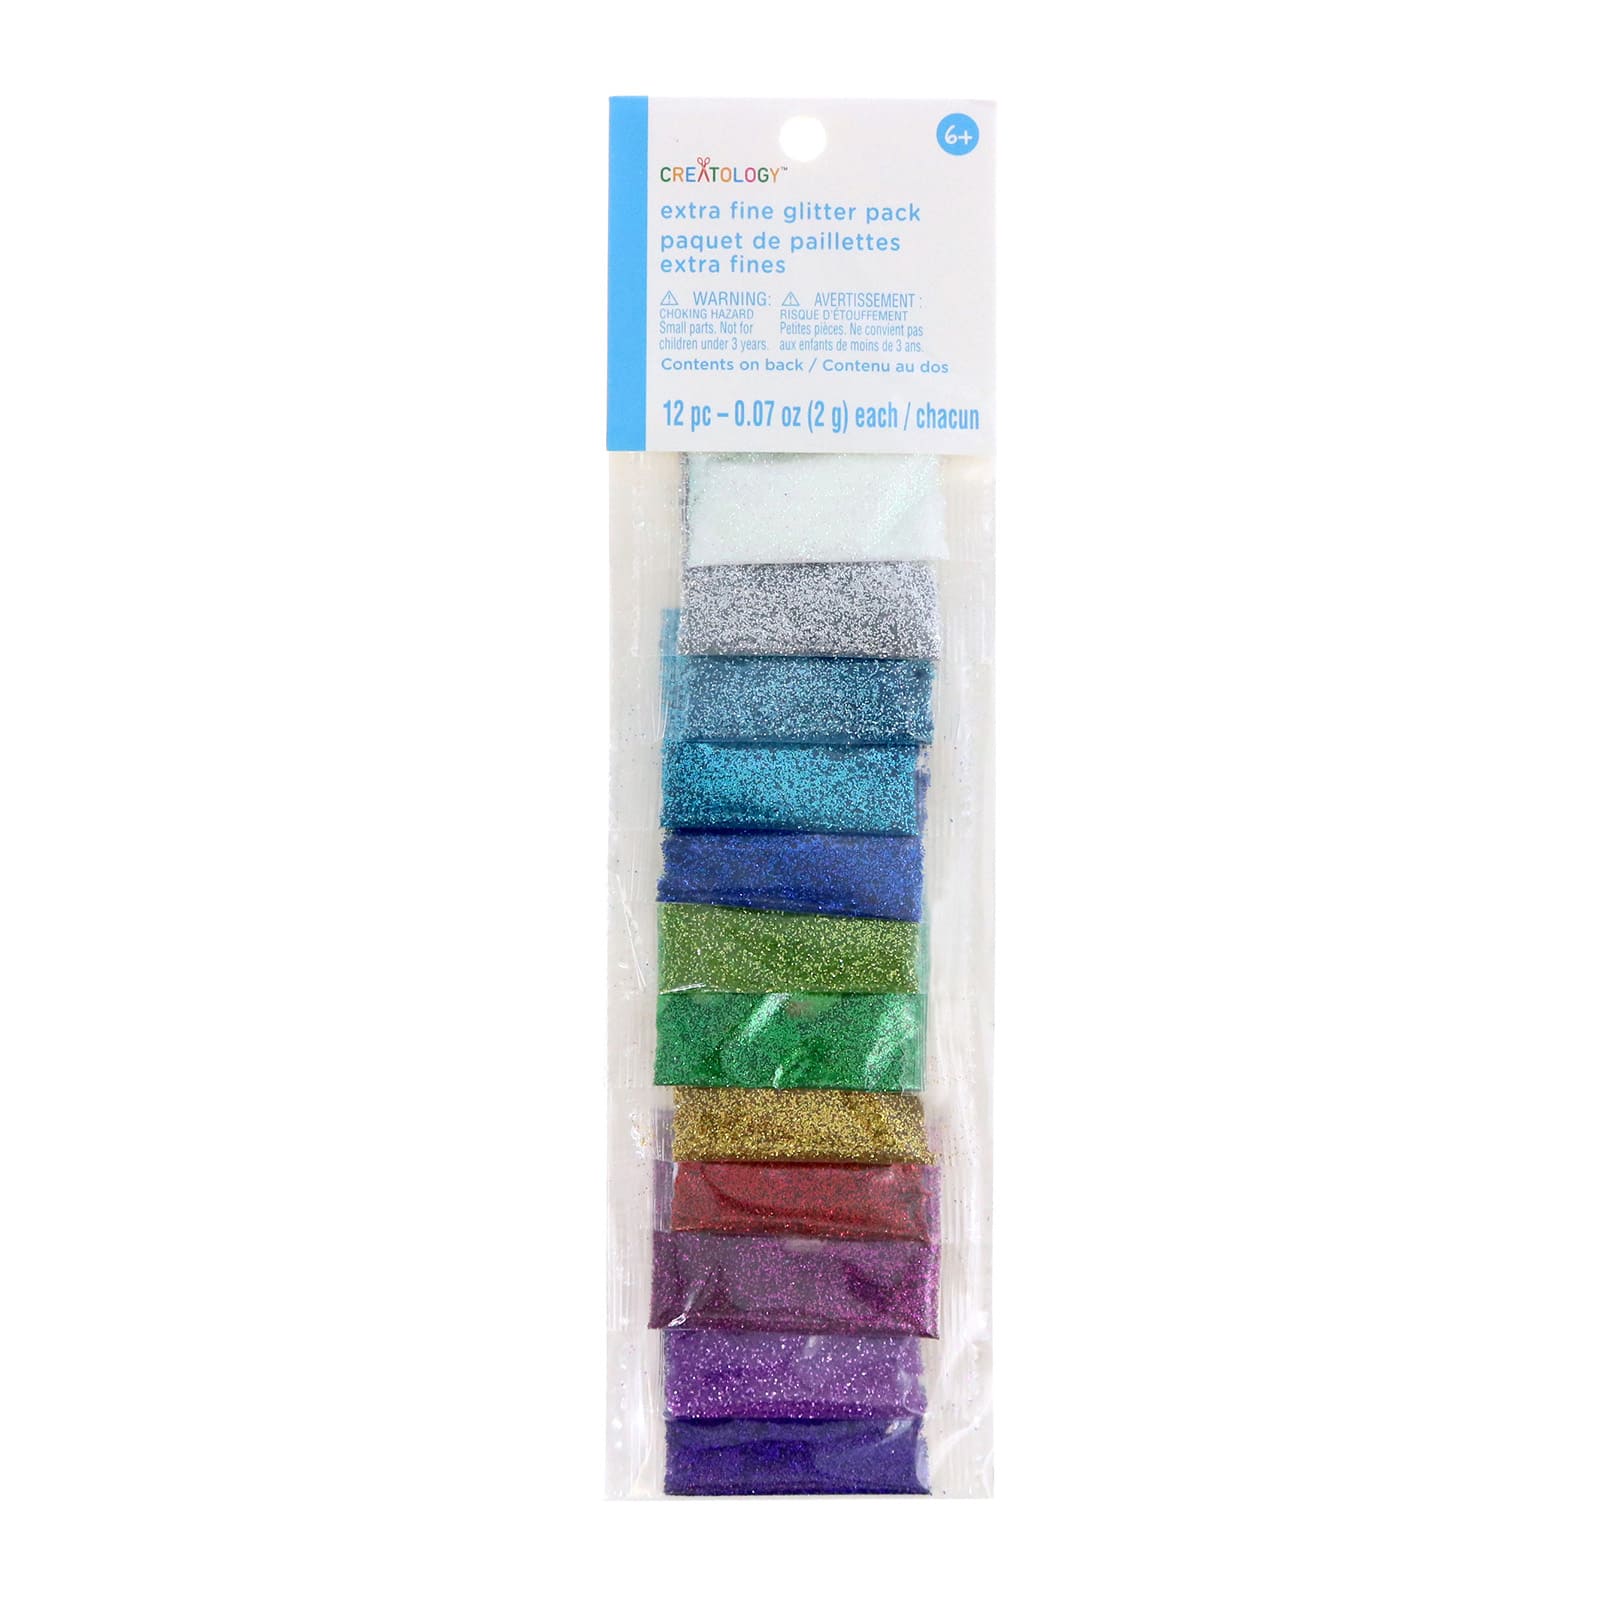 12 Packs: 12 ct. (144 total) Rainbow Extra Fine Glitter Pack by